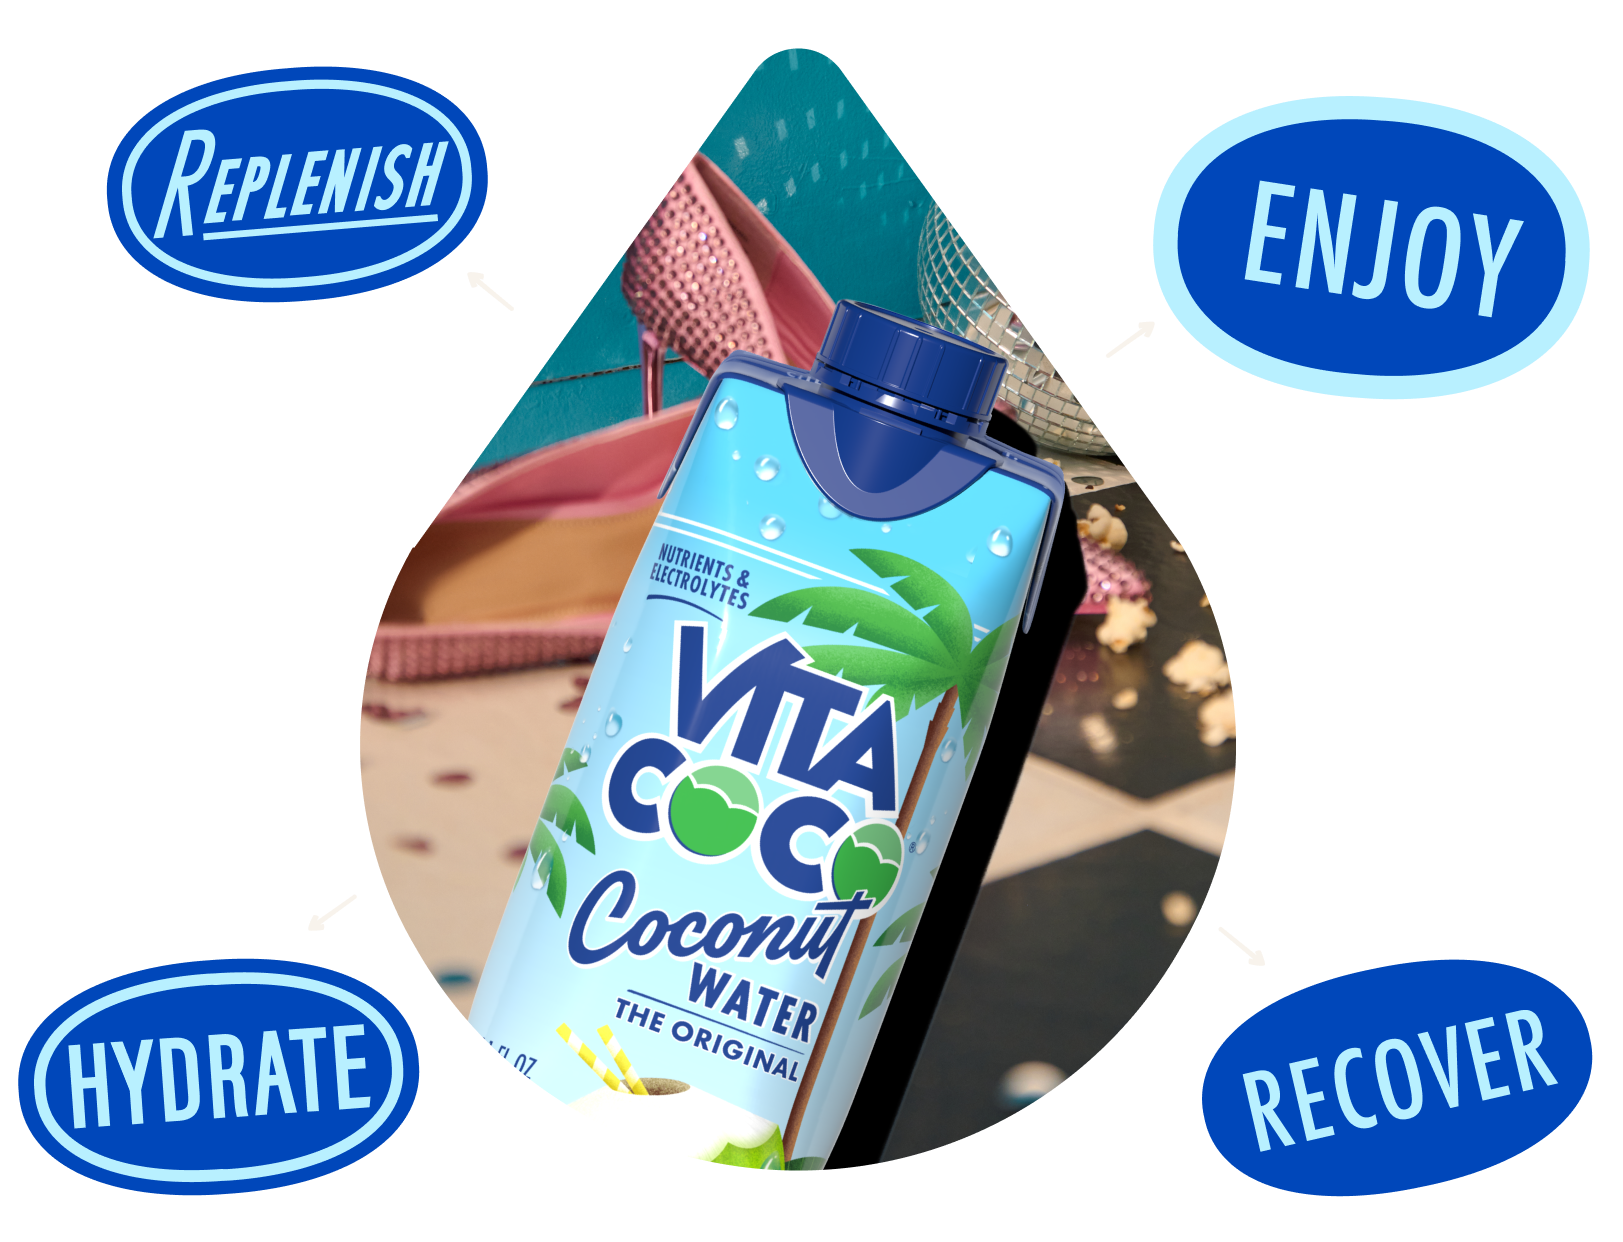 Vitacoco Coconut Water Replenish, Enjoy, Recover and Hydrate 